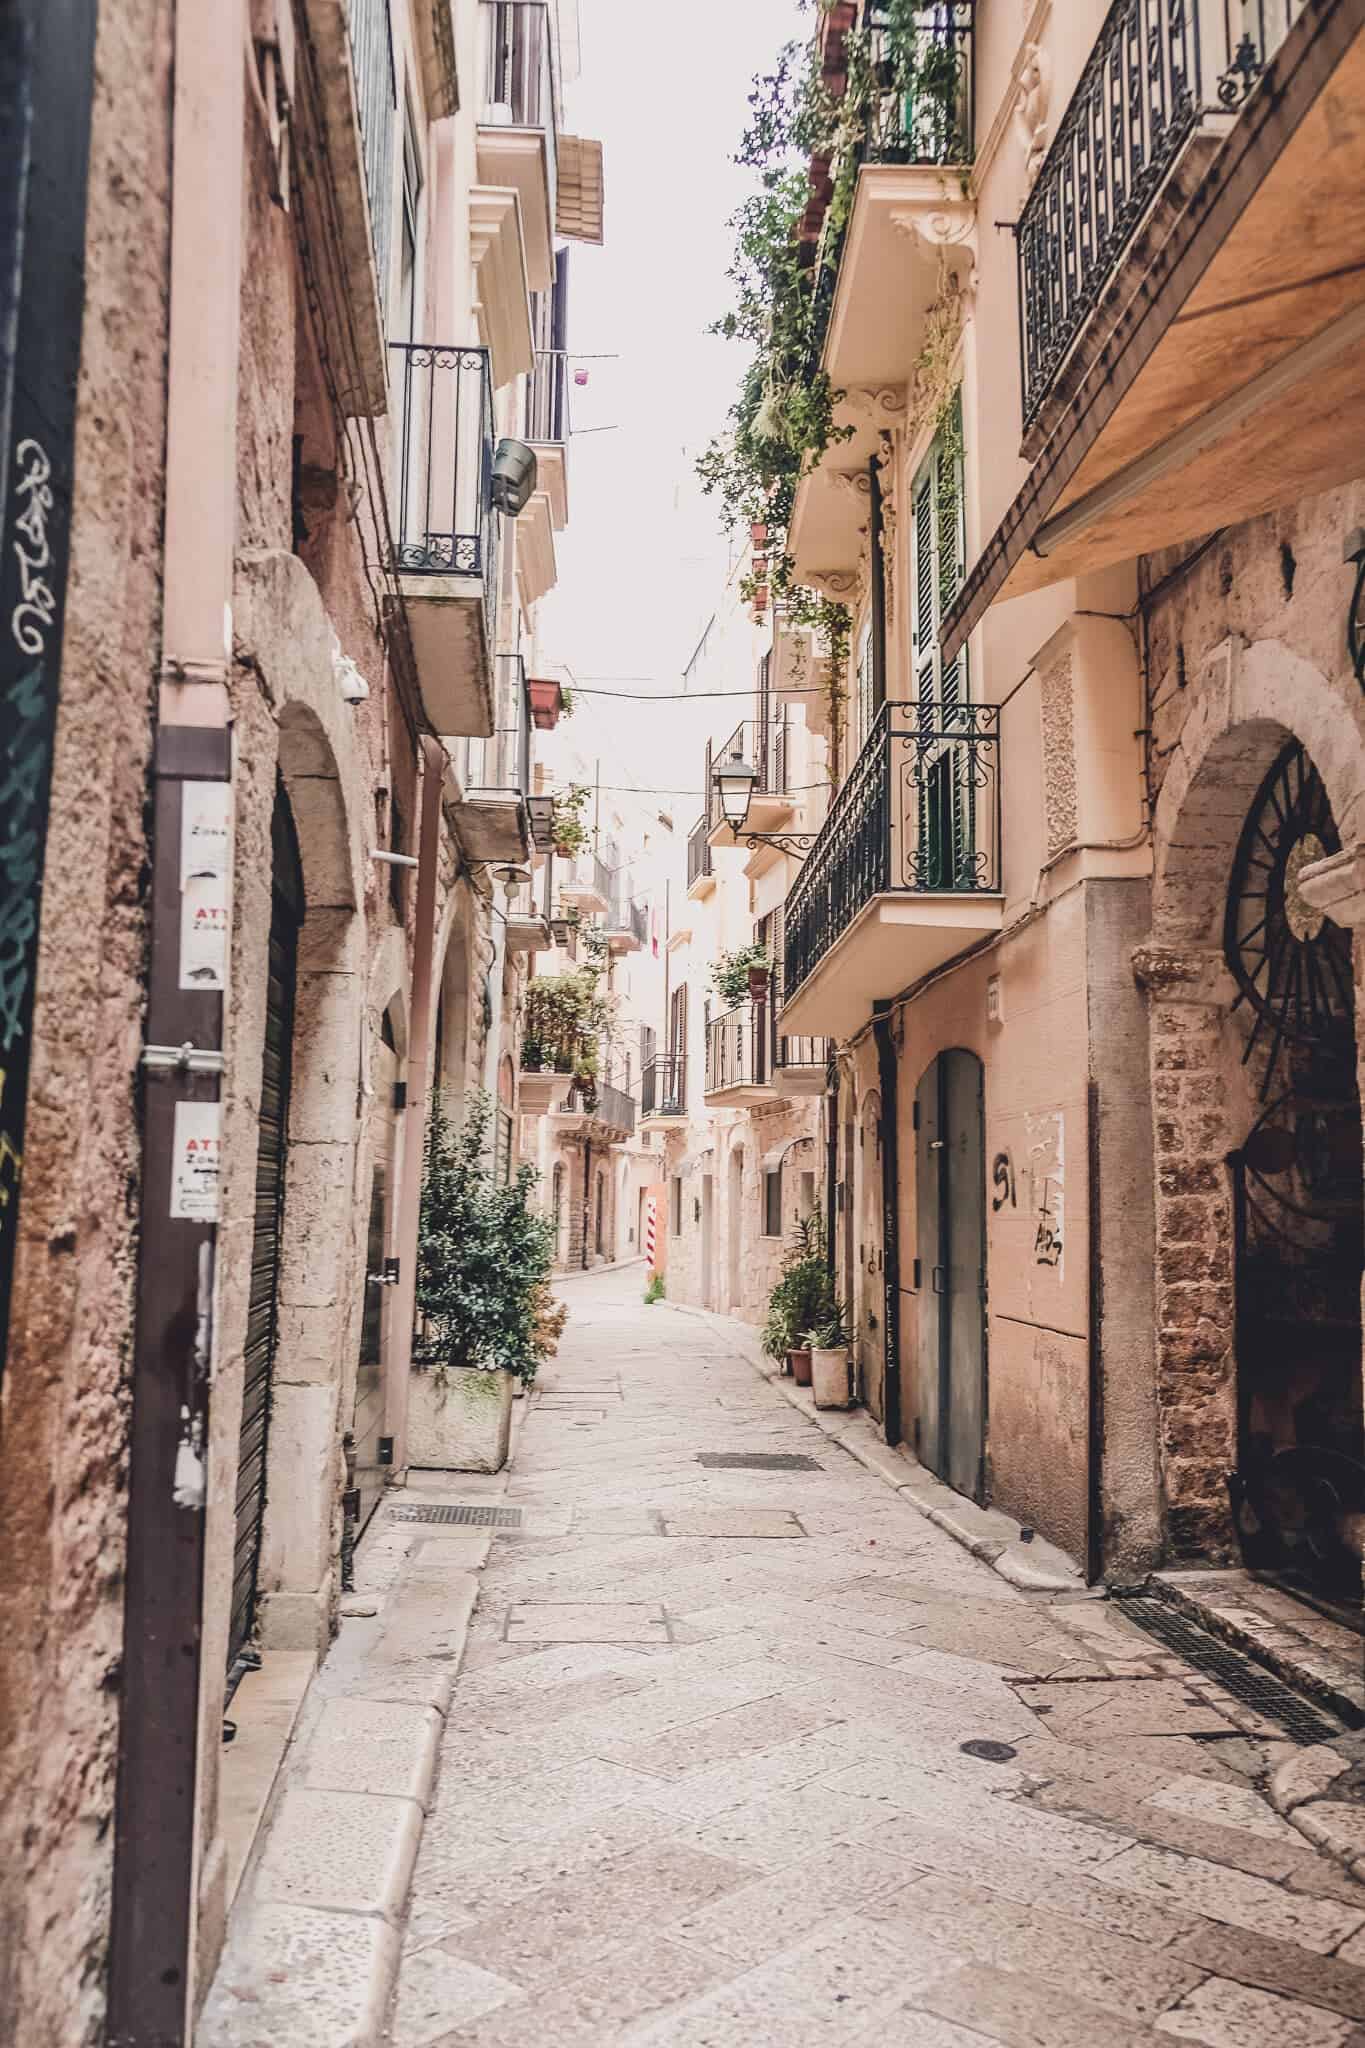 A narrow, picturesque alley in Bari, Italy, lined with old stone buildings and balconies adorned with plants. The alley is paved with stone and has a charming, quaint atmosphere.